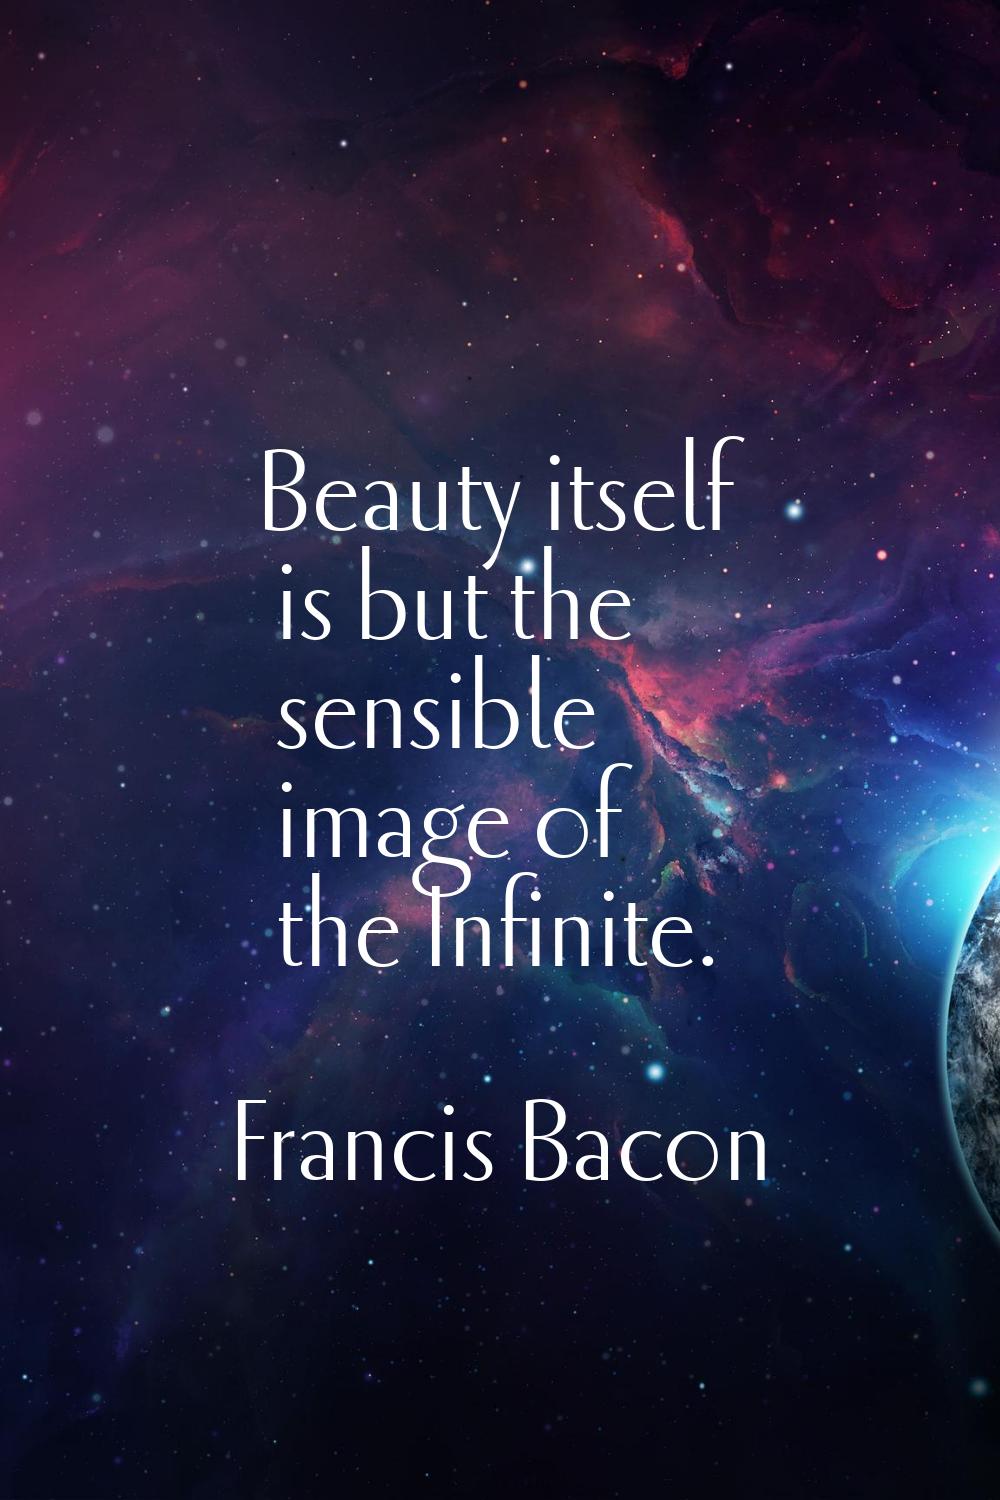 Beauty itself is but the sensible image of the Infinite.